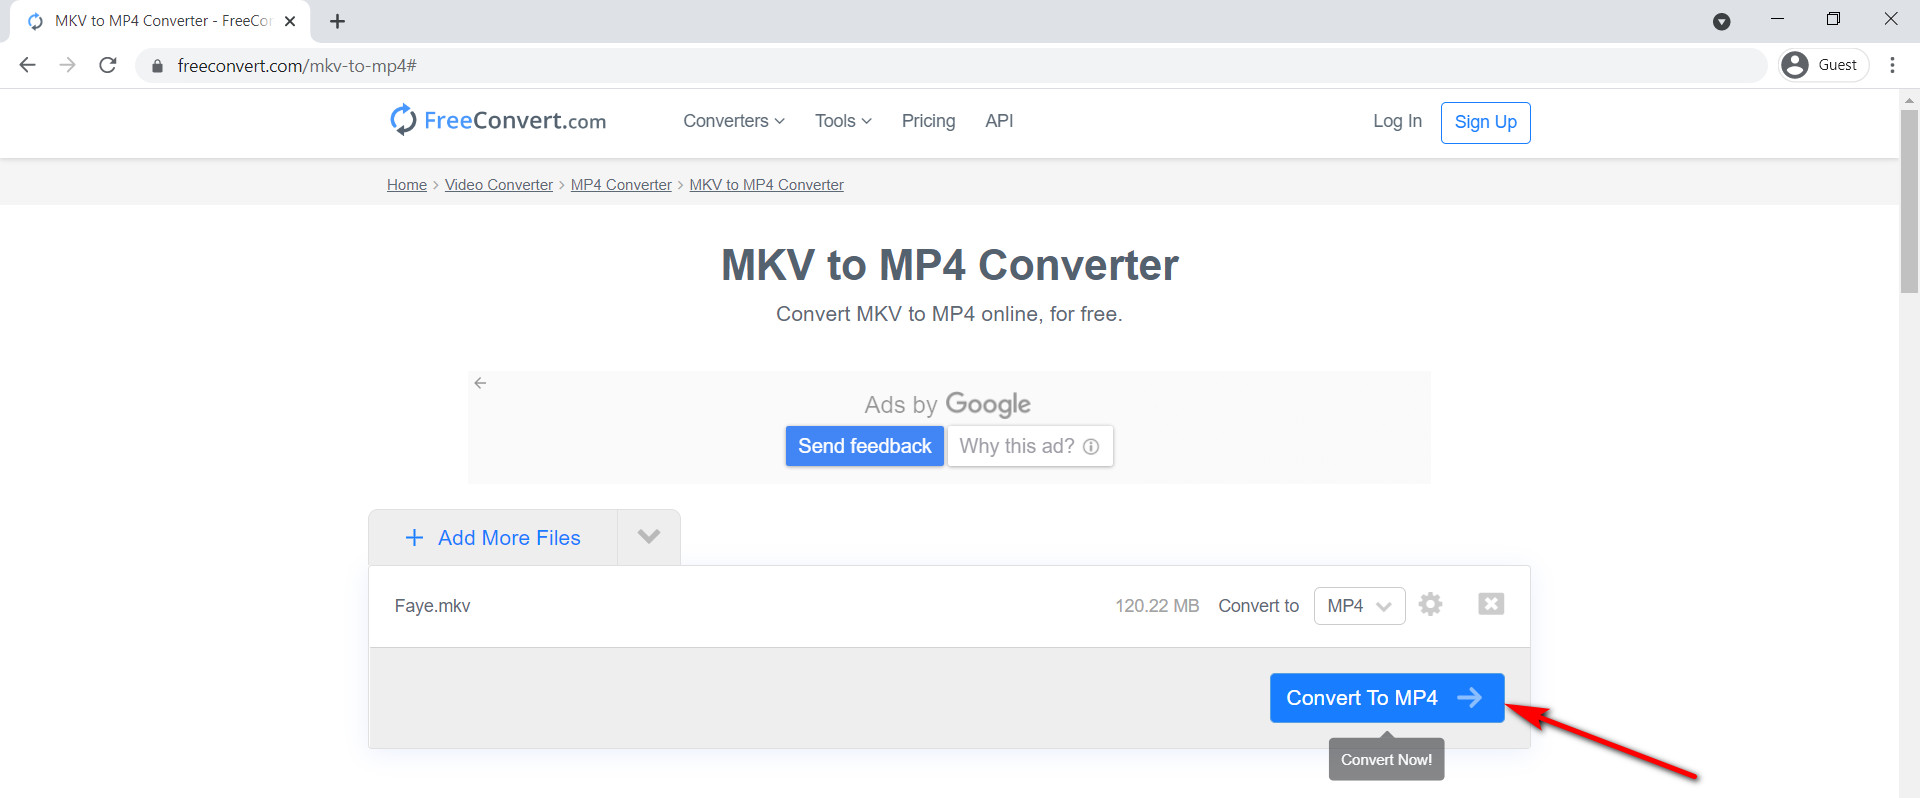 Click Convert To MP4 to start converting